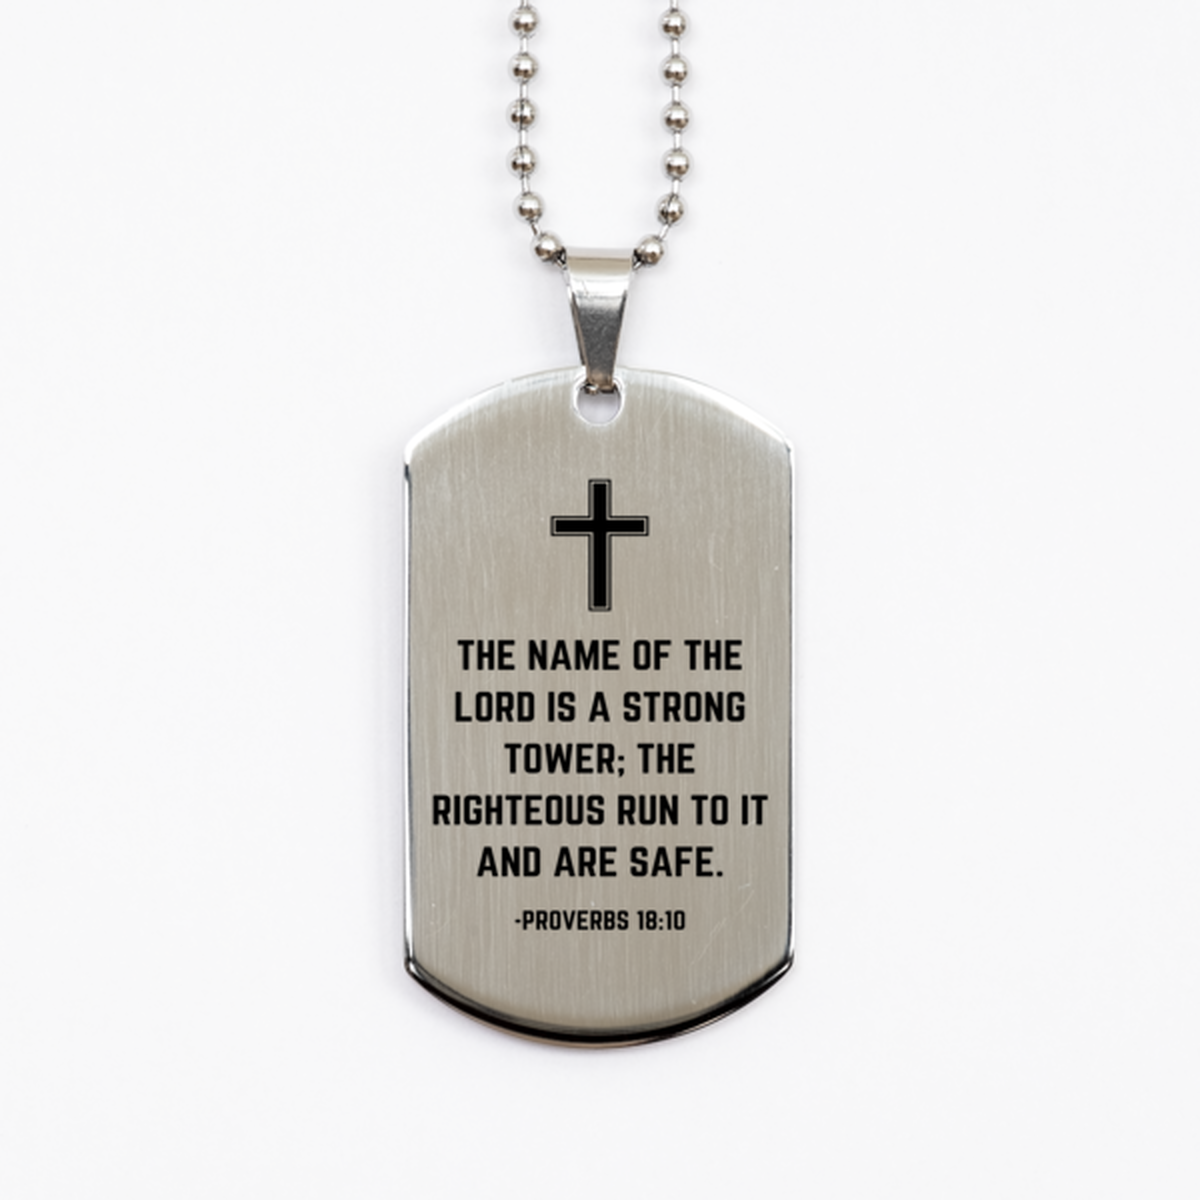 Baptism Gifts For Teenage Boys Girls, Christian Bible Verse Silver Dog Tag, The name of the Lord is a strong, Confirmation Gifts, Bible Verse Necklace for Son, Godson, Grandson, Nephew